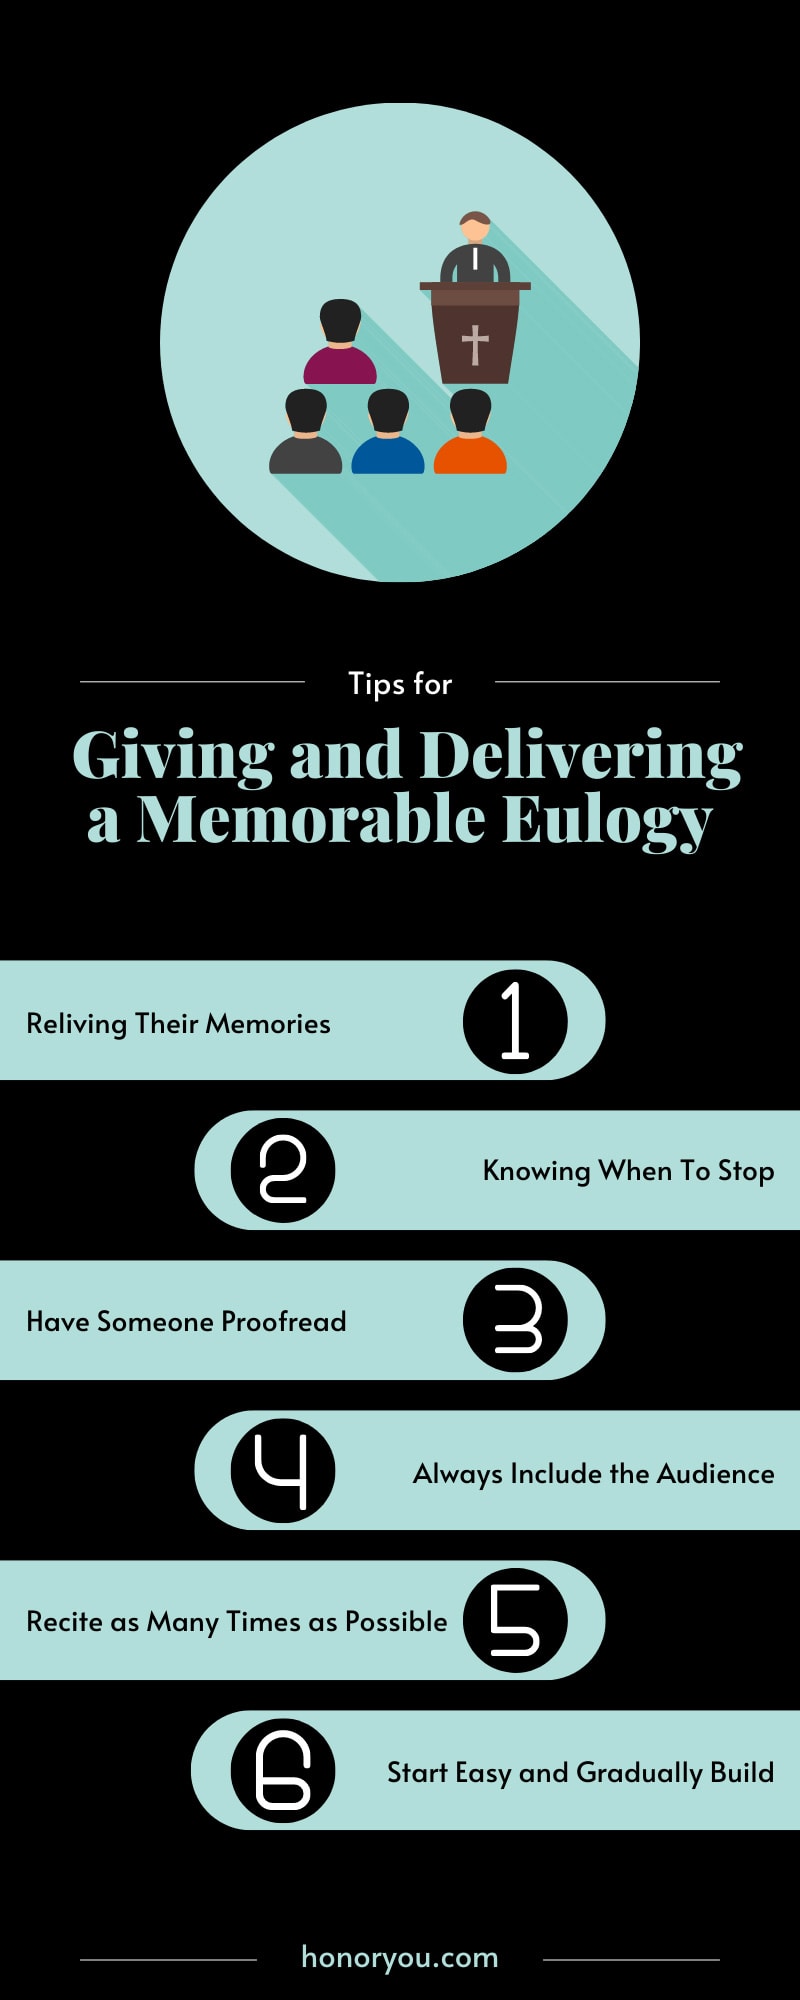 10 Tips for Giving and Delivering a Memorable Eulogy